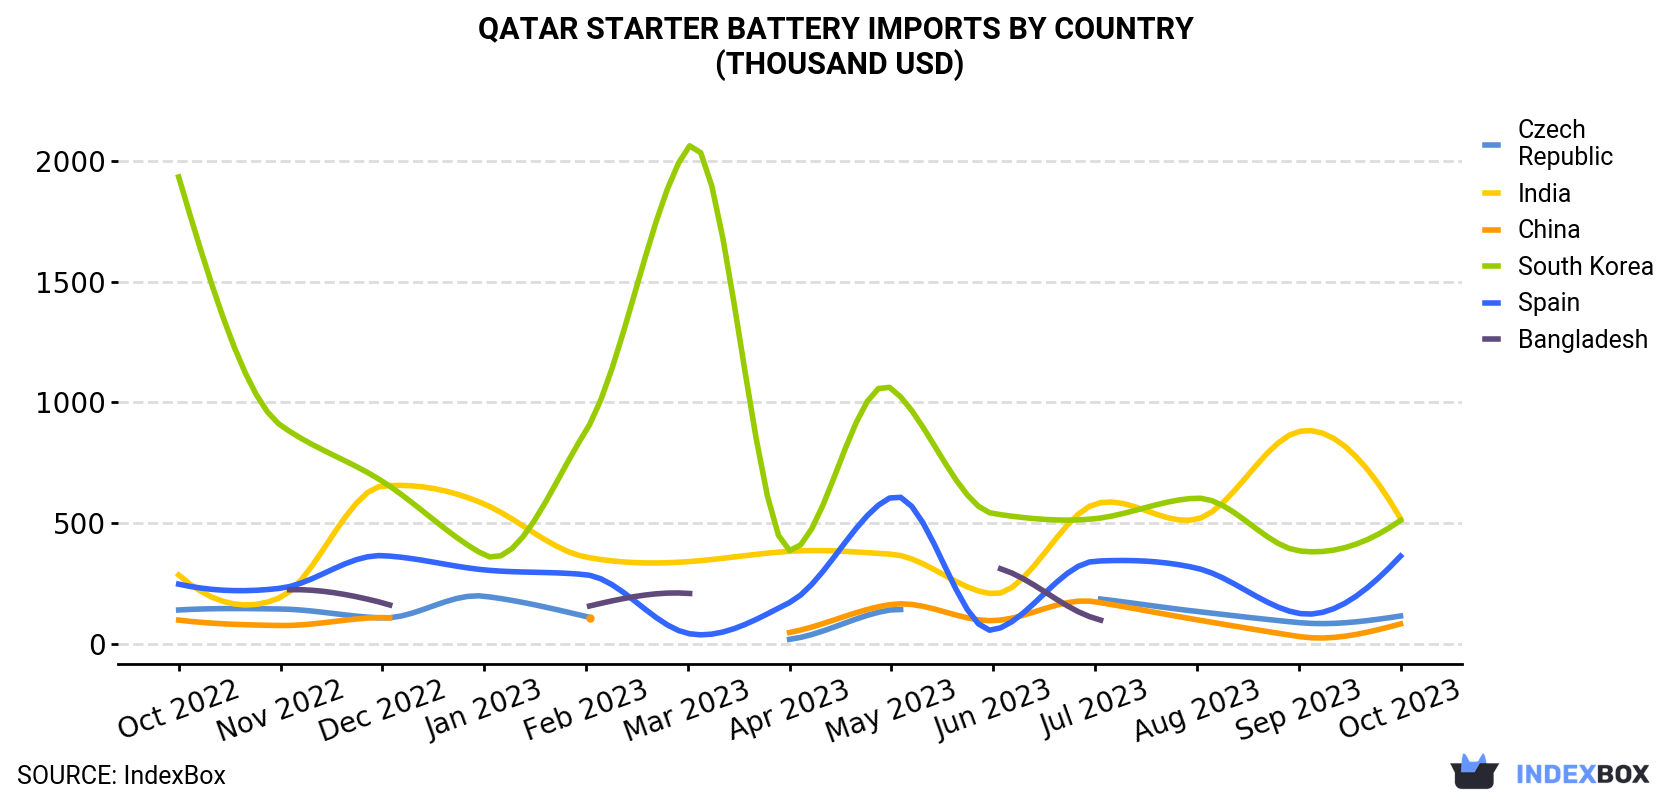 Qatar Starter Battery Imports By Country (Thousand USD)